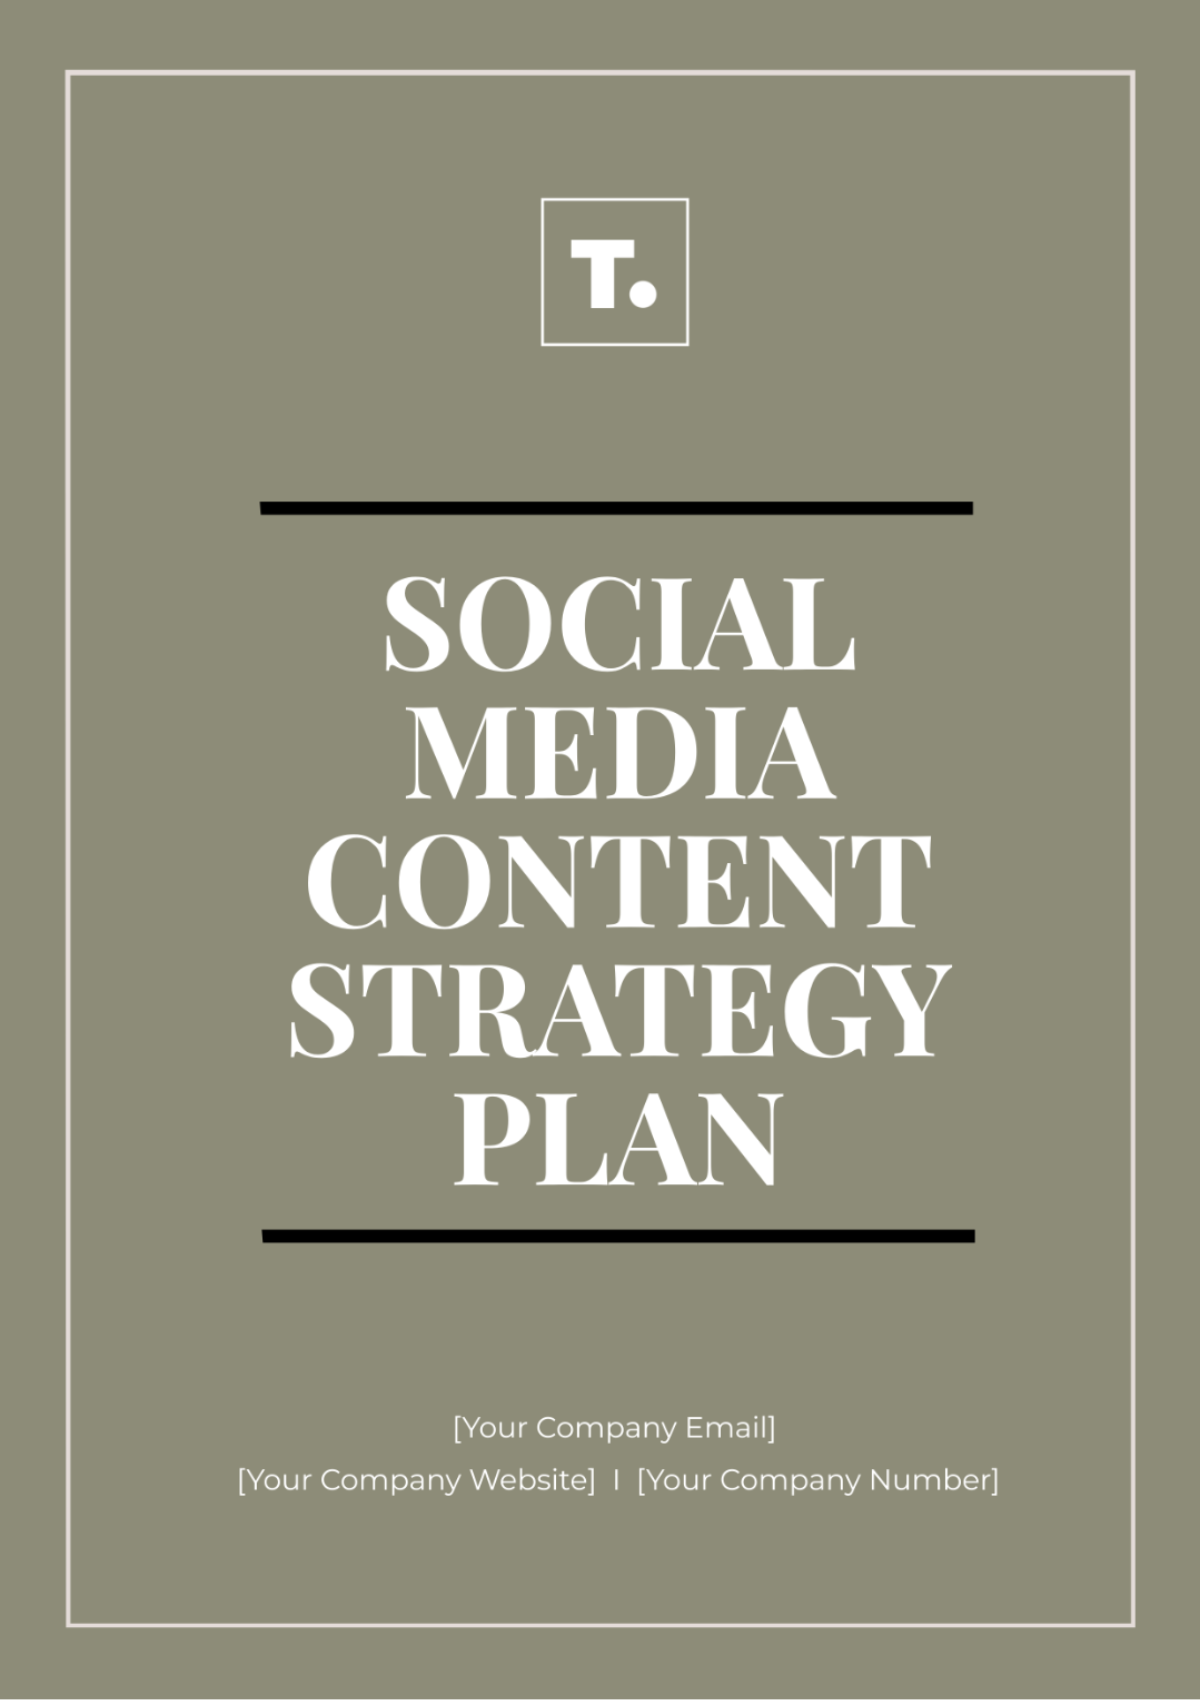 Social Media Content Strategy Plan Template